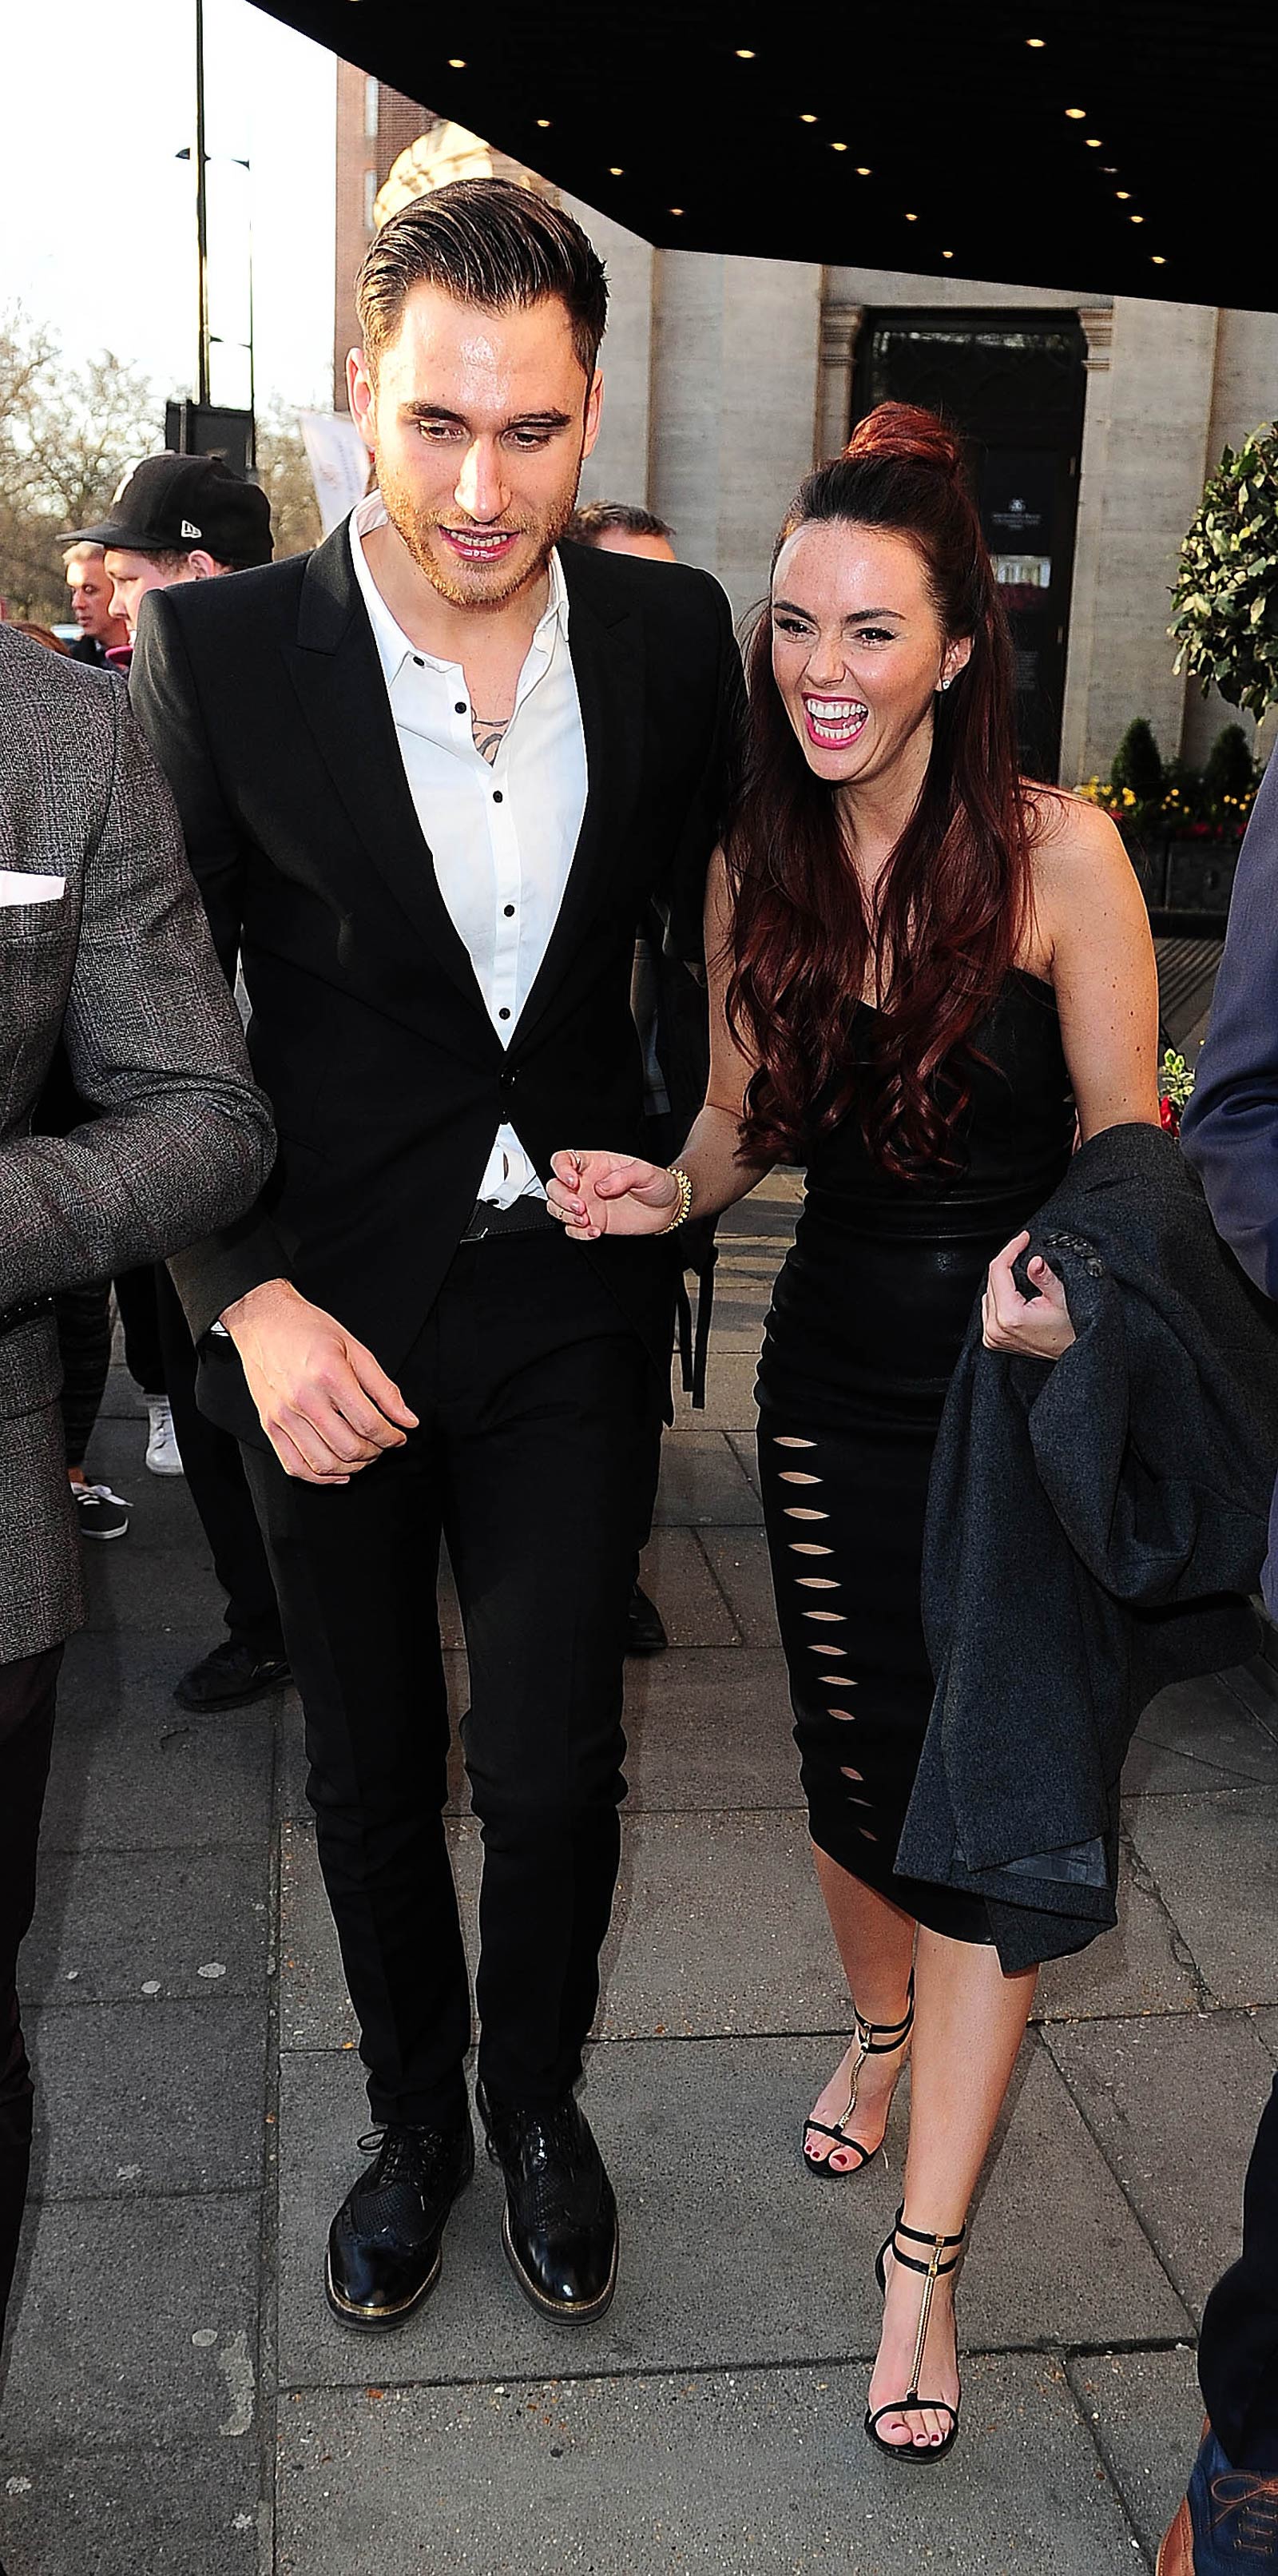 Jennifer Metcalfe attends The TRIC Awards 2015